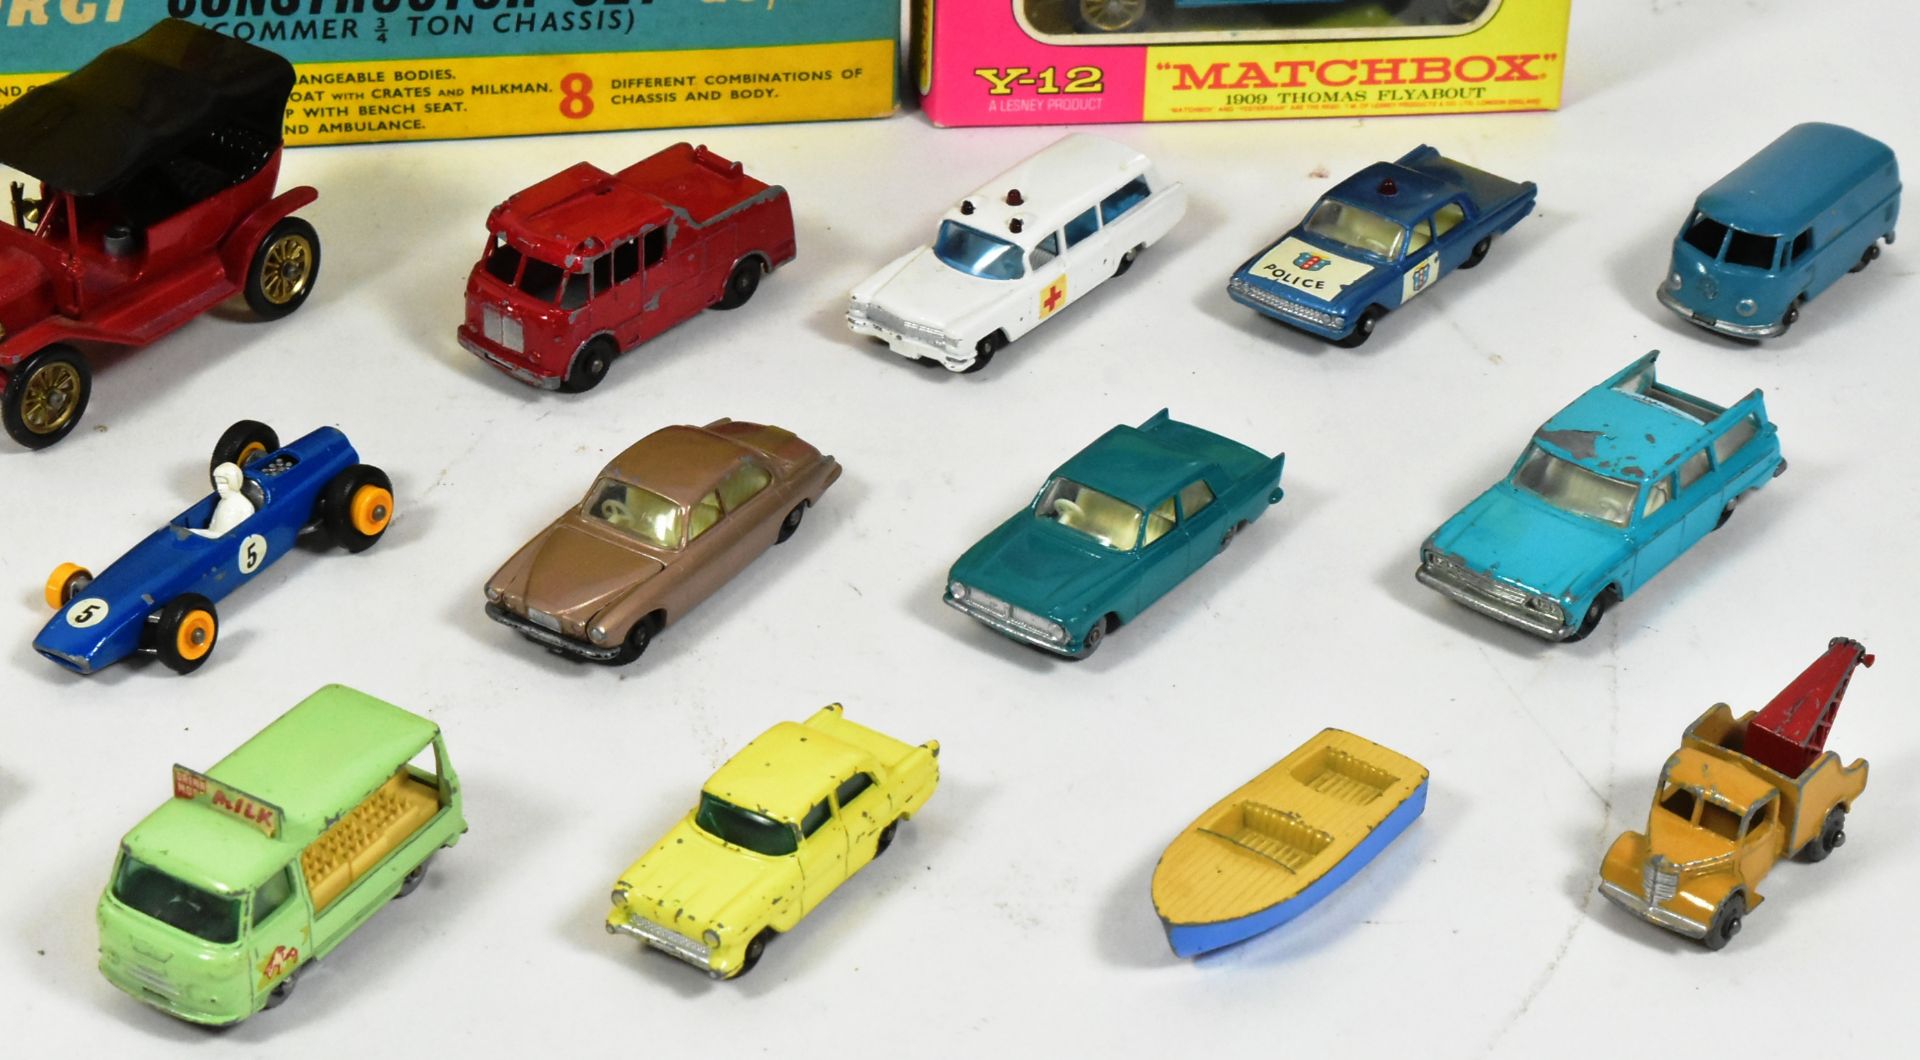 DIECAST - COLLECTION OF VINTAGE DIECAST MODELS - Image 6 of 6